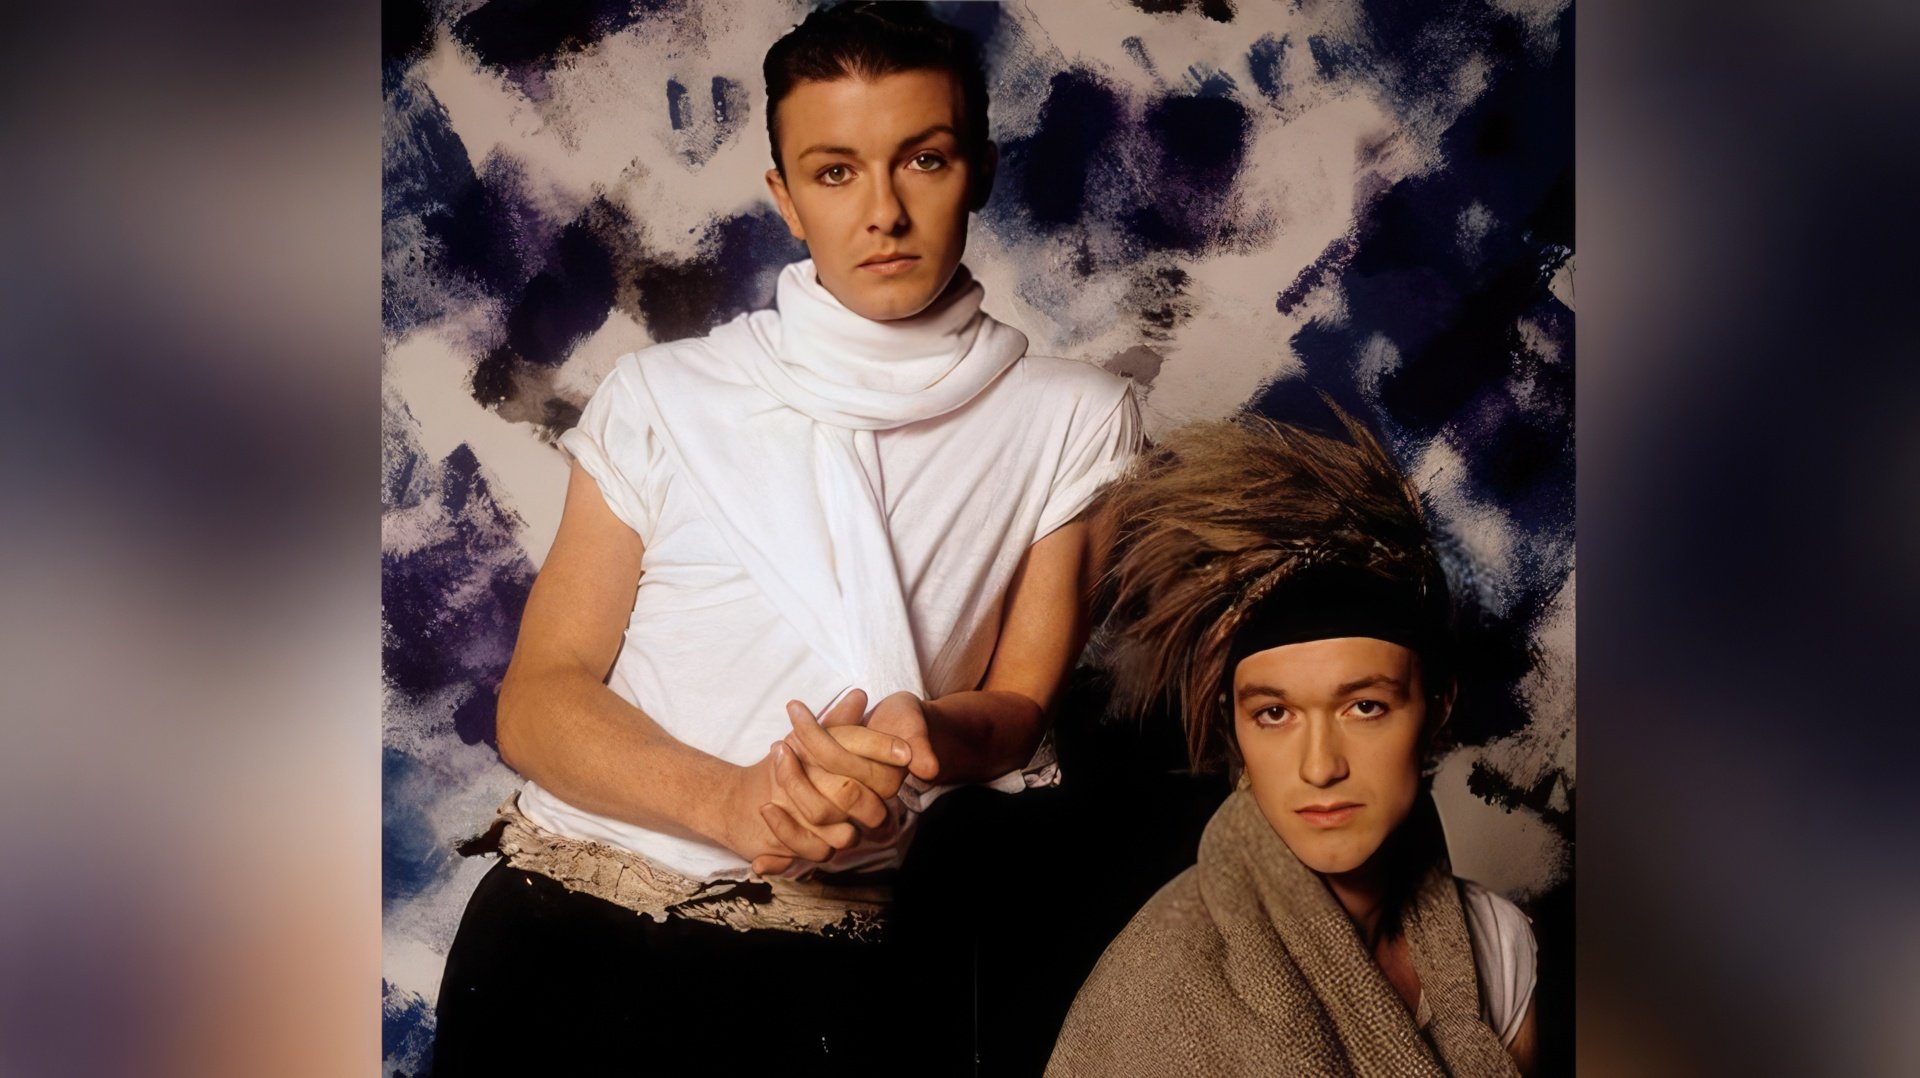 New wave pop duo Seona Dancing: Ricky Gervais and Bill Macrae